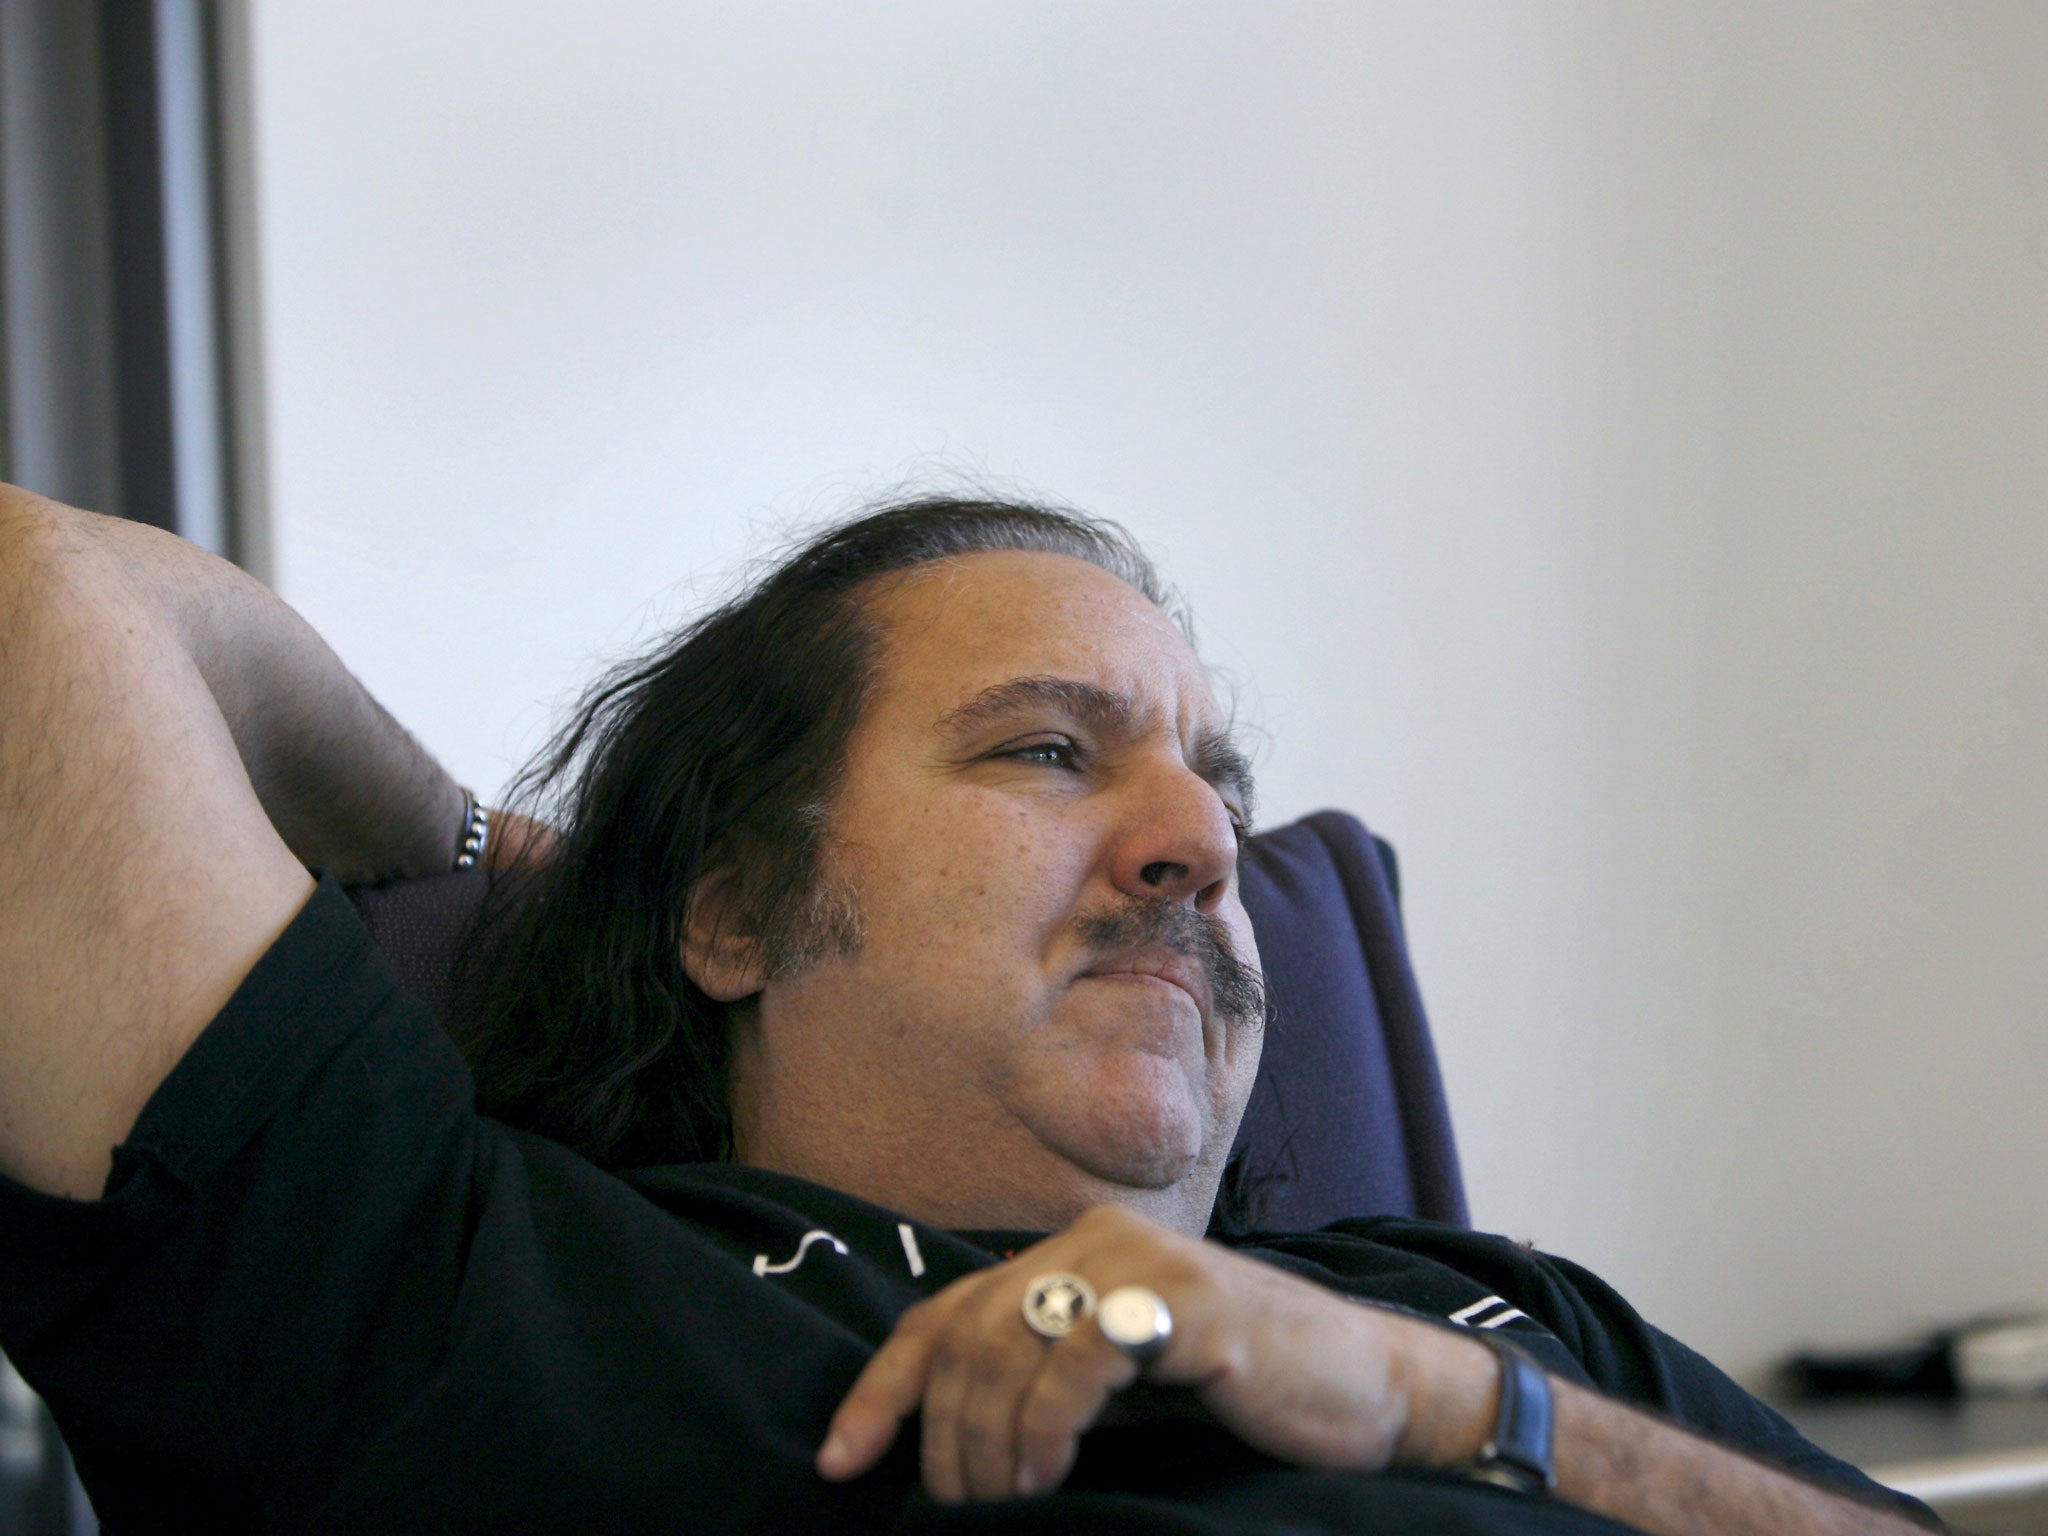 Ron Jeremy Appeared In Videos 1